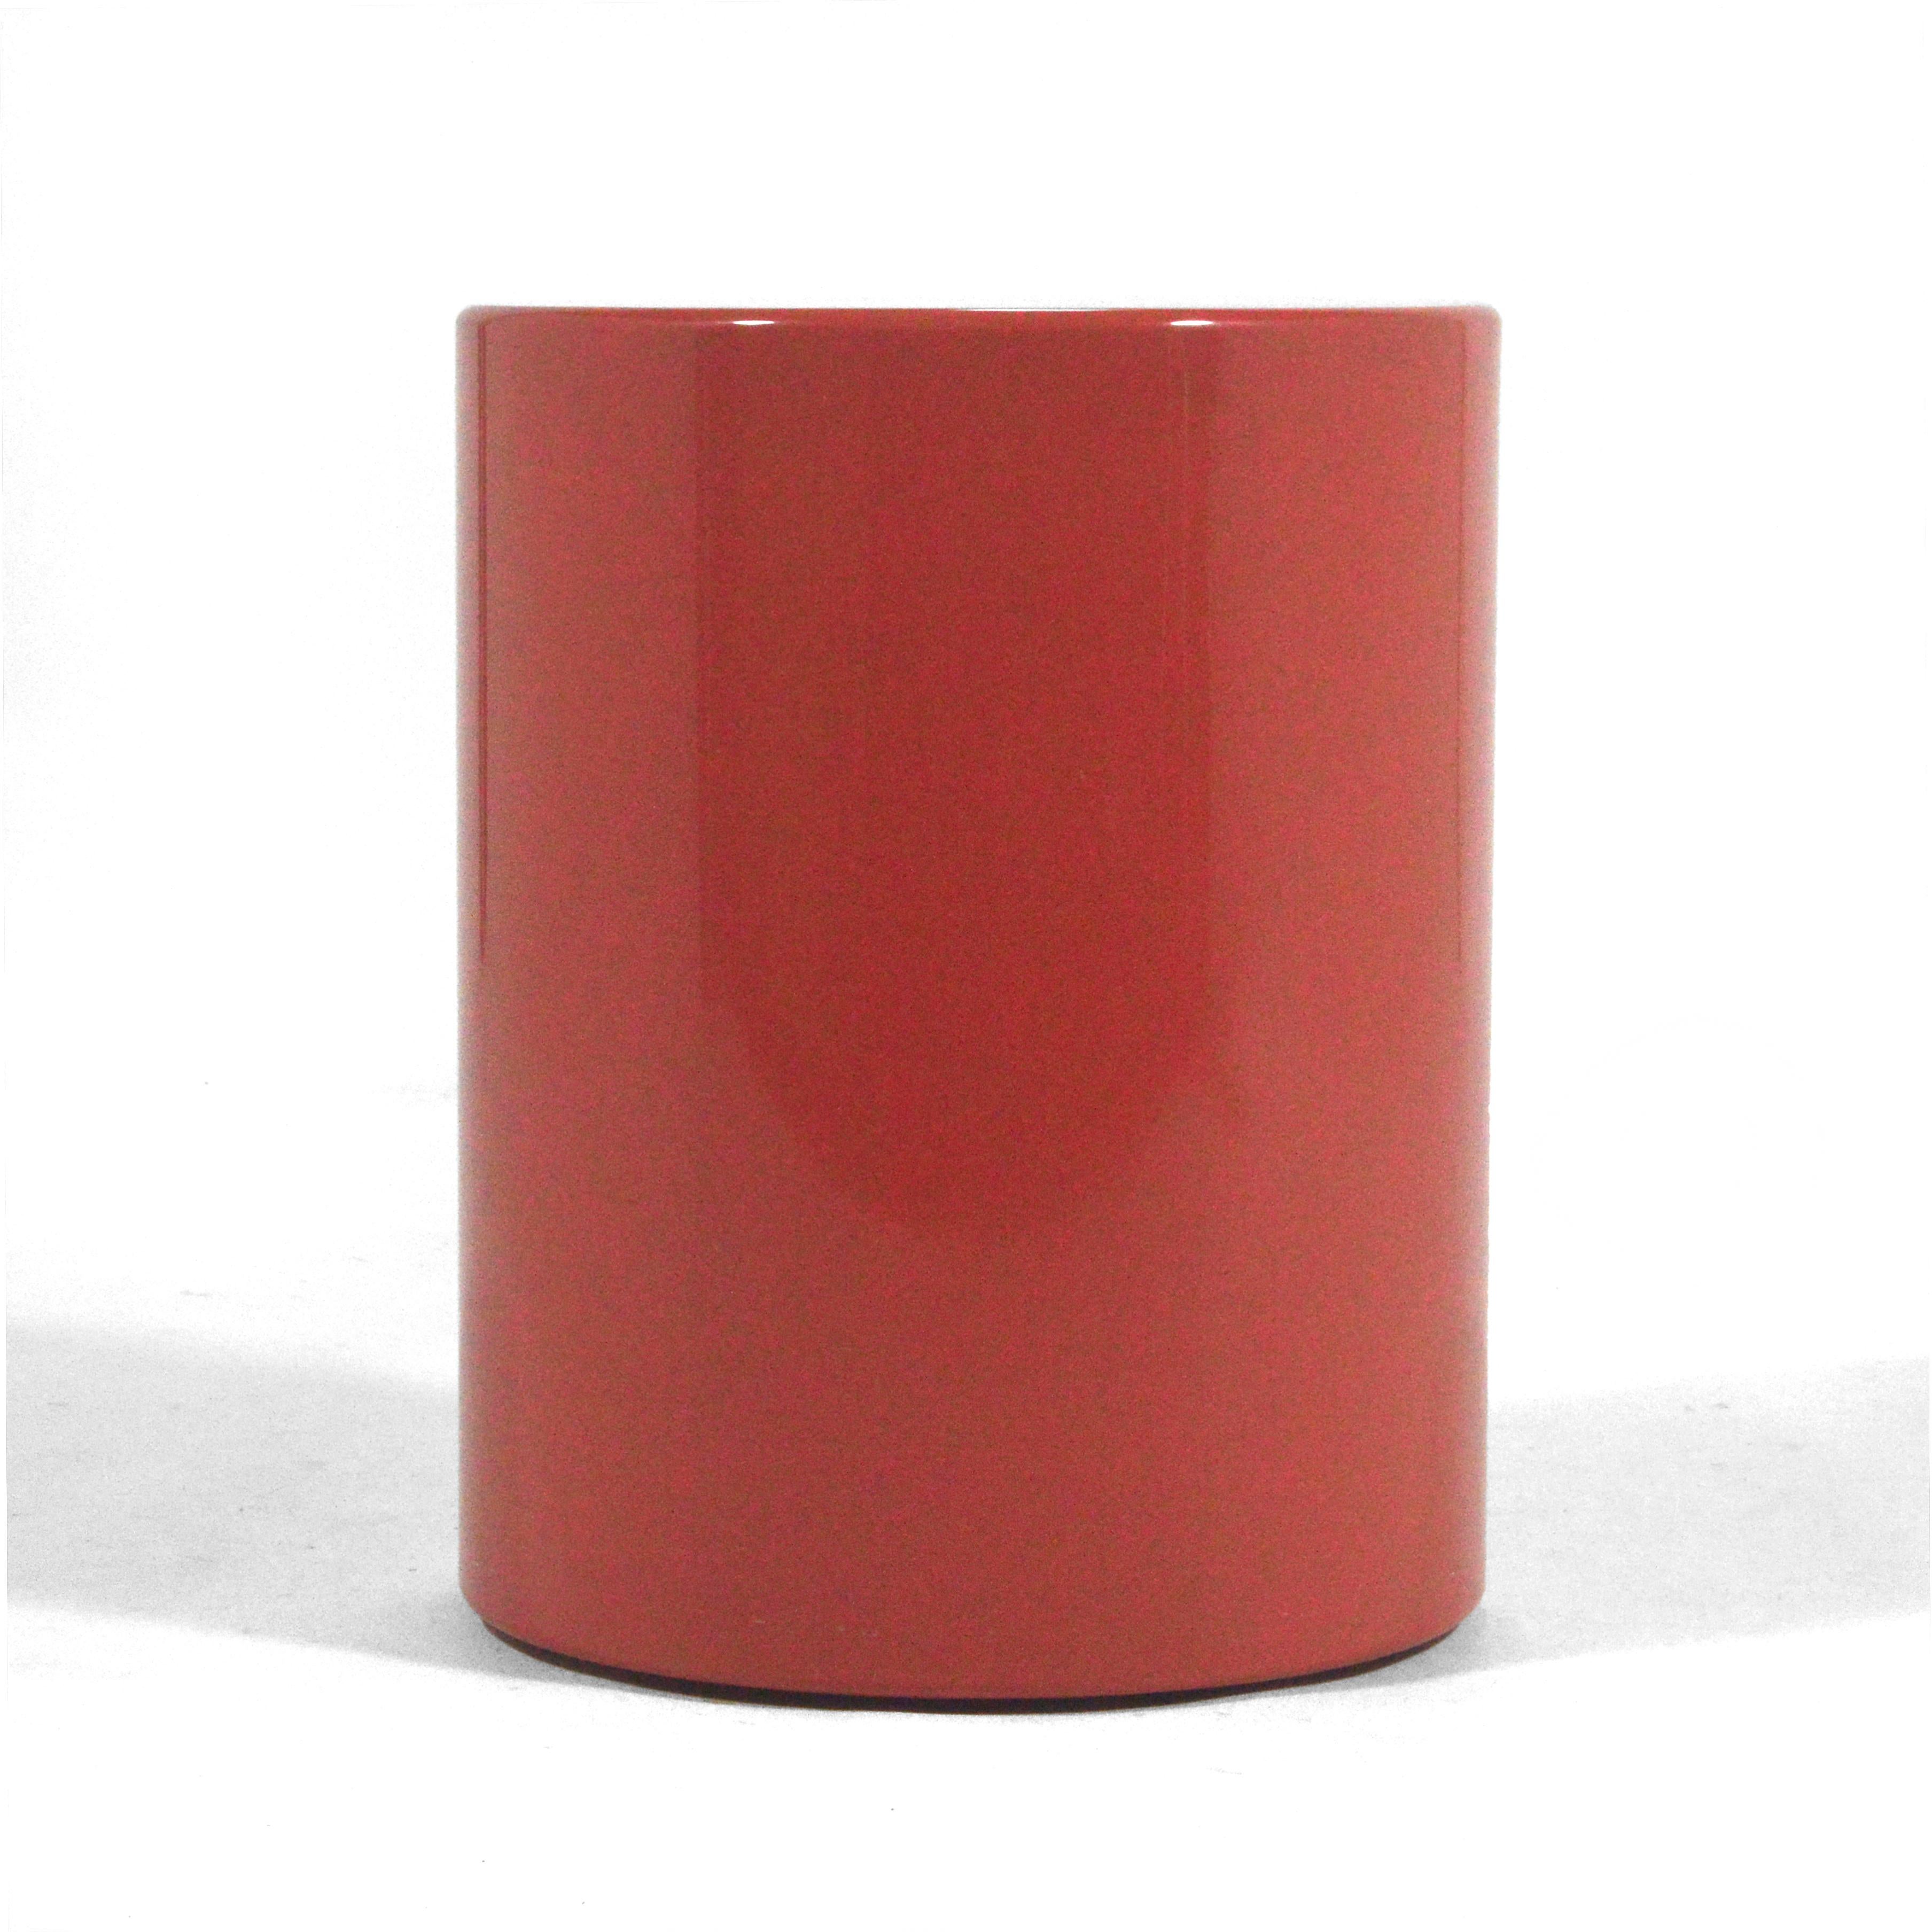 This minimalist, cylindrical side table or pedestal by Metro is finished in a beautiful 